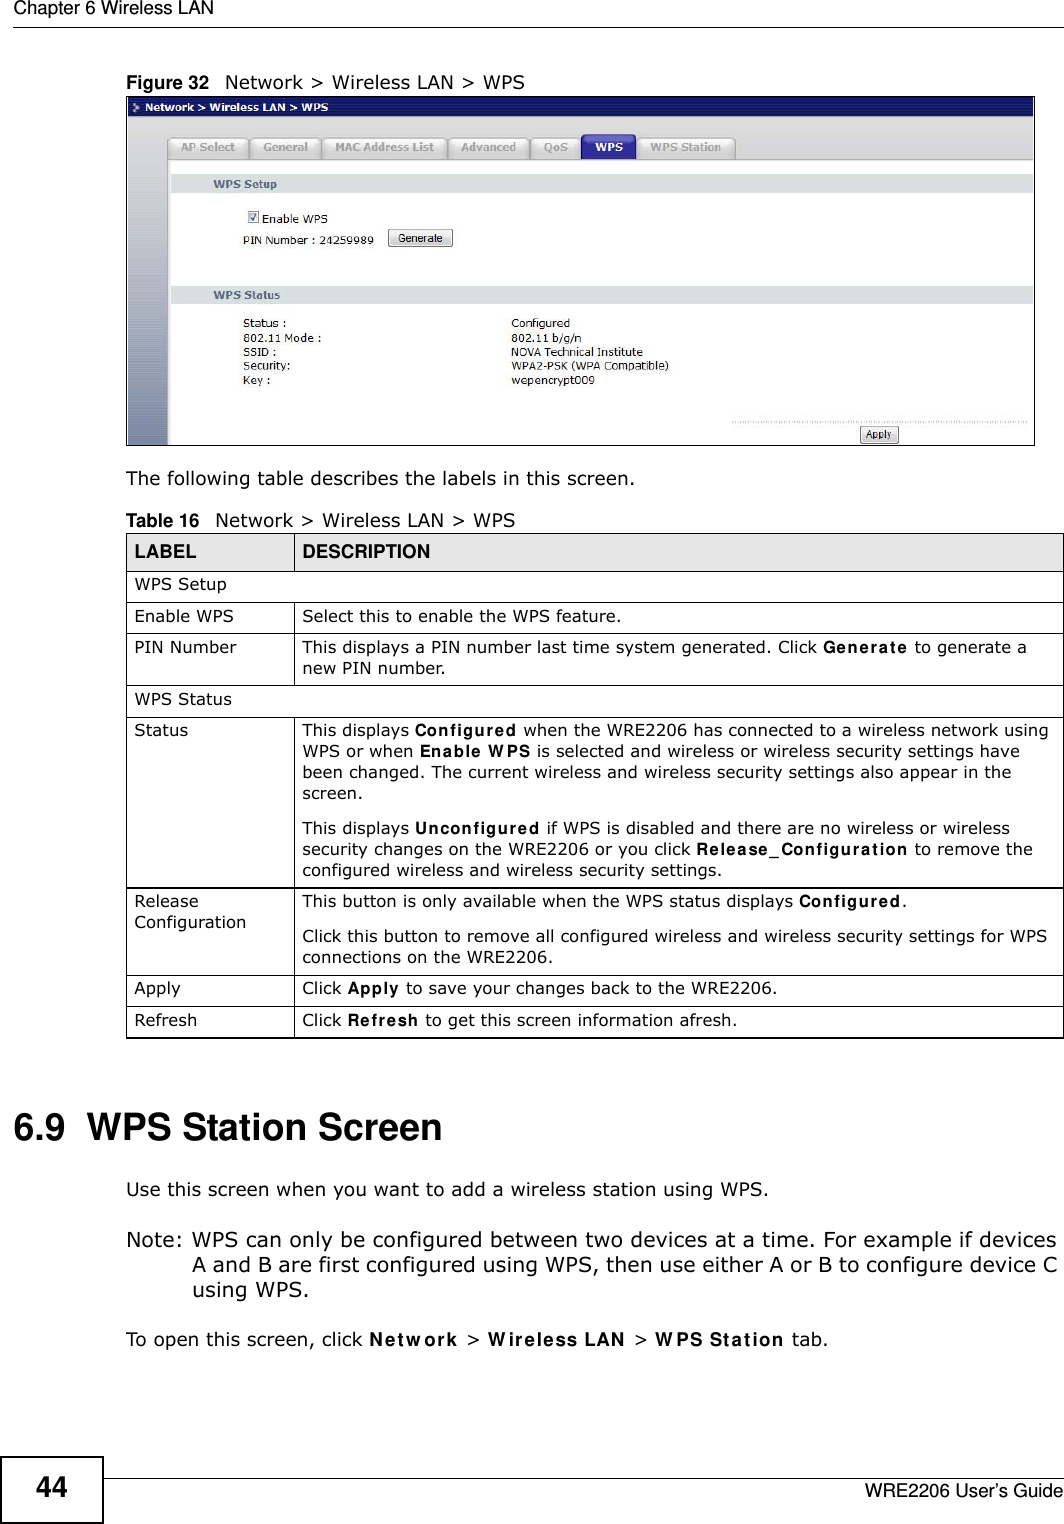 Chapter 6 Wireless LANWRE2206 User’s Guide44Figure 32   Network &gt; Wireless LAN &gt; WPSThe following table describes the labels in this screen.6.9  WPS Station ScreenUse this screen when you want to add a wireless station using WPS. Note: WPS can only be configured between two devices at a time. For example if devices A and B are first configured using WPS, then use either A or B to configure device C using WPS. To open this screen, click N e t w or k  &gt; W ireless LAN  &gt; W PS Stat ion tab.Table 16   Network &gt; Wireless LAN &gt; WPSLABEL DESCRIPTIONWPS SetupEnable WPS Select this to enable the WPS feature.PIN Number This displays a PIN number last time system generated. Click Ge ne r a t e to generate a new PIN number.WPS StatusStatus This displays Configur e d when the WRE2206 has connected to a wireless network using WPS or when Ena ble  W PS is selected and wireless or wireless security settings have been changed. The current wireless and wireless security settings also appear in the screen.This displays Un configure d if WPS is disabled and there are no wireless or wireless security changes on the WRE2206 or you click Rele ase_ Configu ra tion to remove the configured wireless and wireless security settings.Release ConfigurationThis button is only available when the WPS status displays Con figur ed.Click this button to remove all configured wireless and wireless security settings for WPS connections on the WRE2206.Apply Click Apply to save your changes back to the WRE2206.Refresh Click Refre sh to get this screen information afresh.